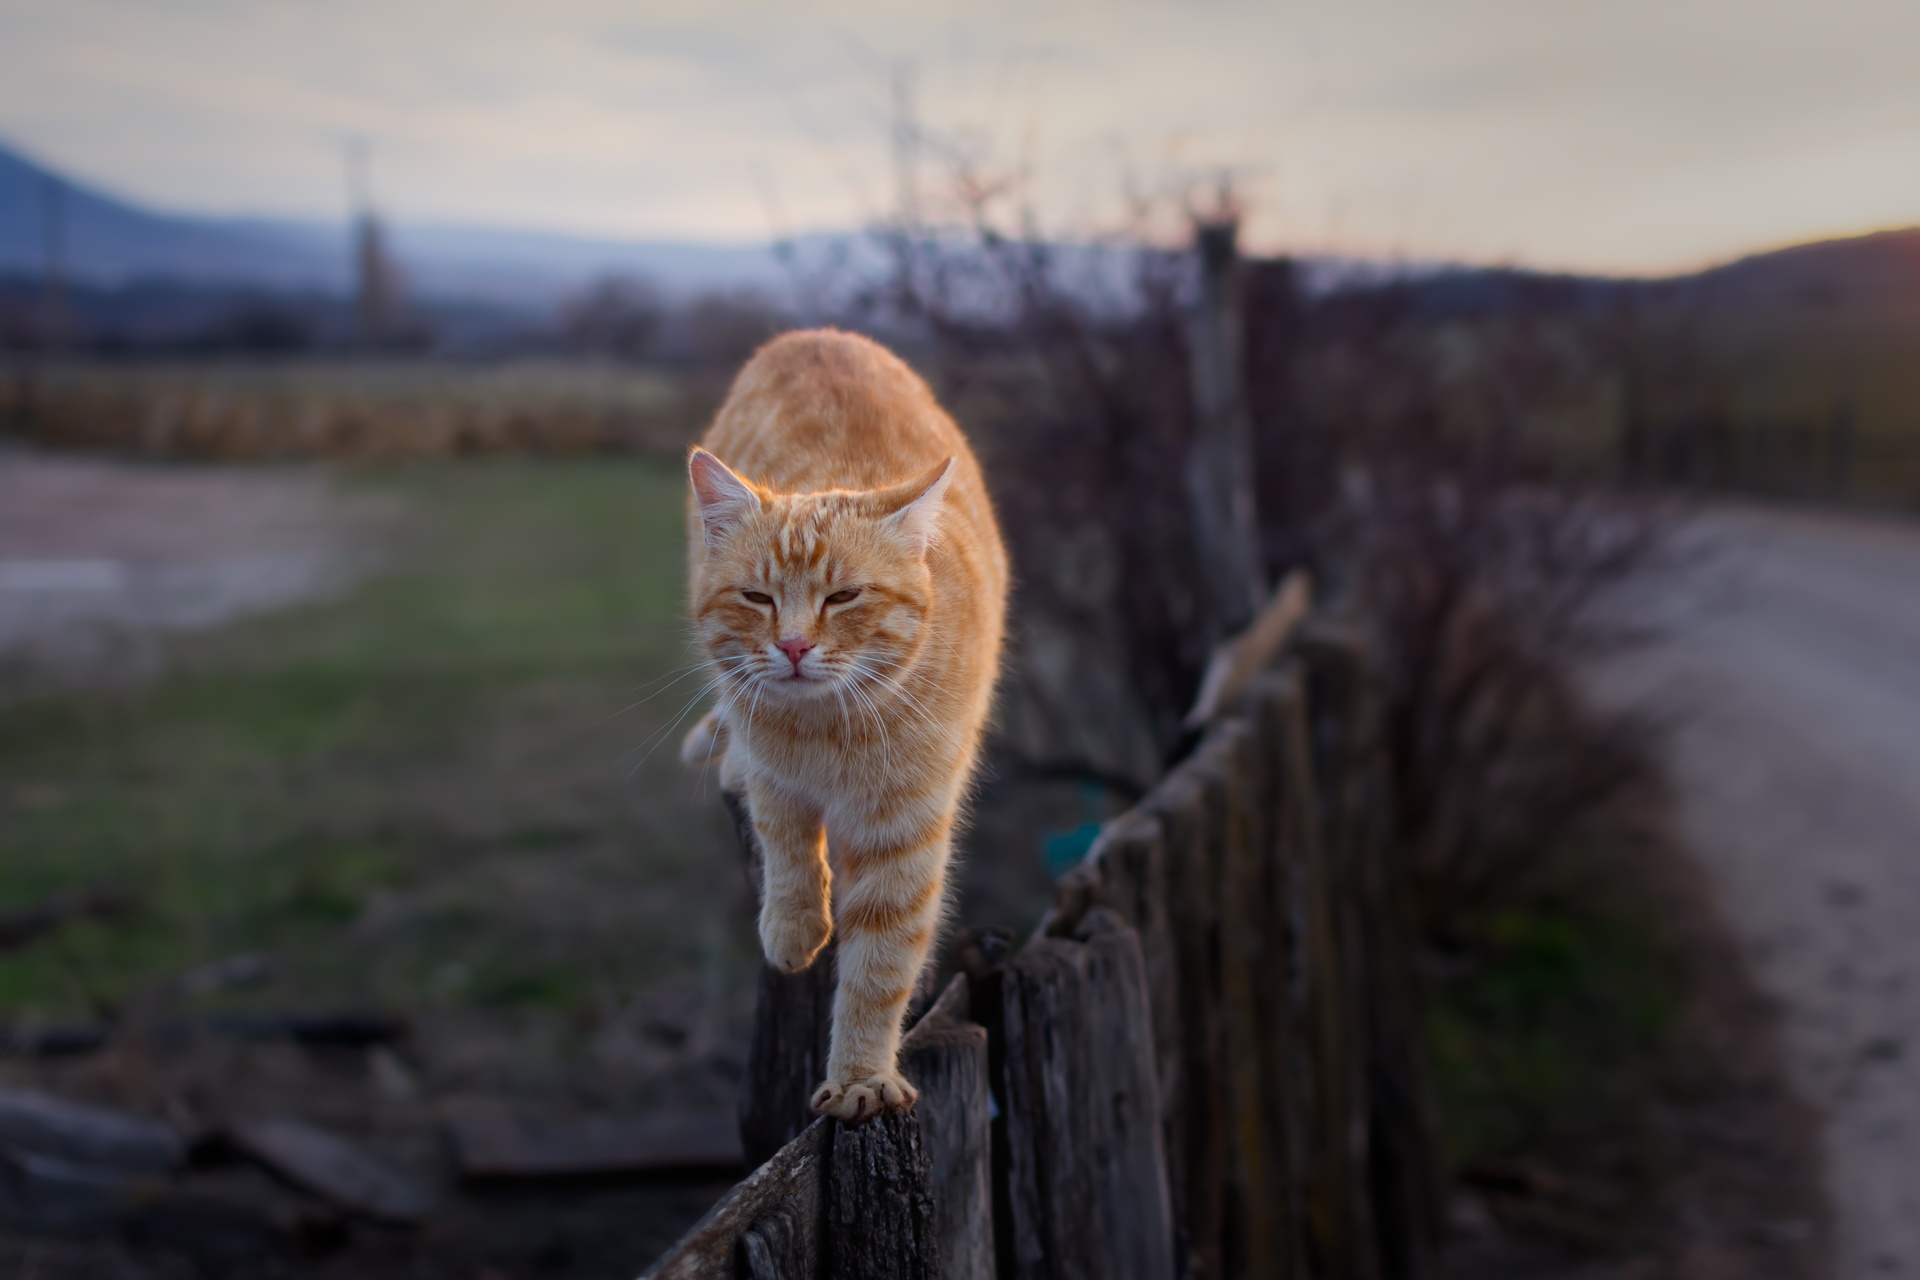 An outdoor cat walking on a fence